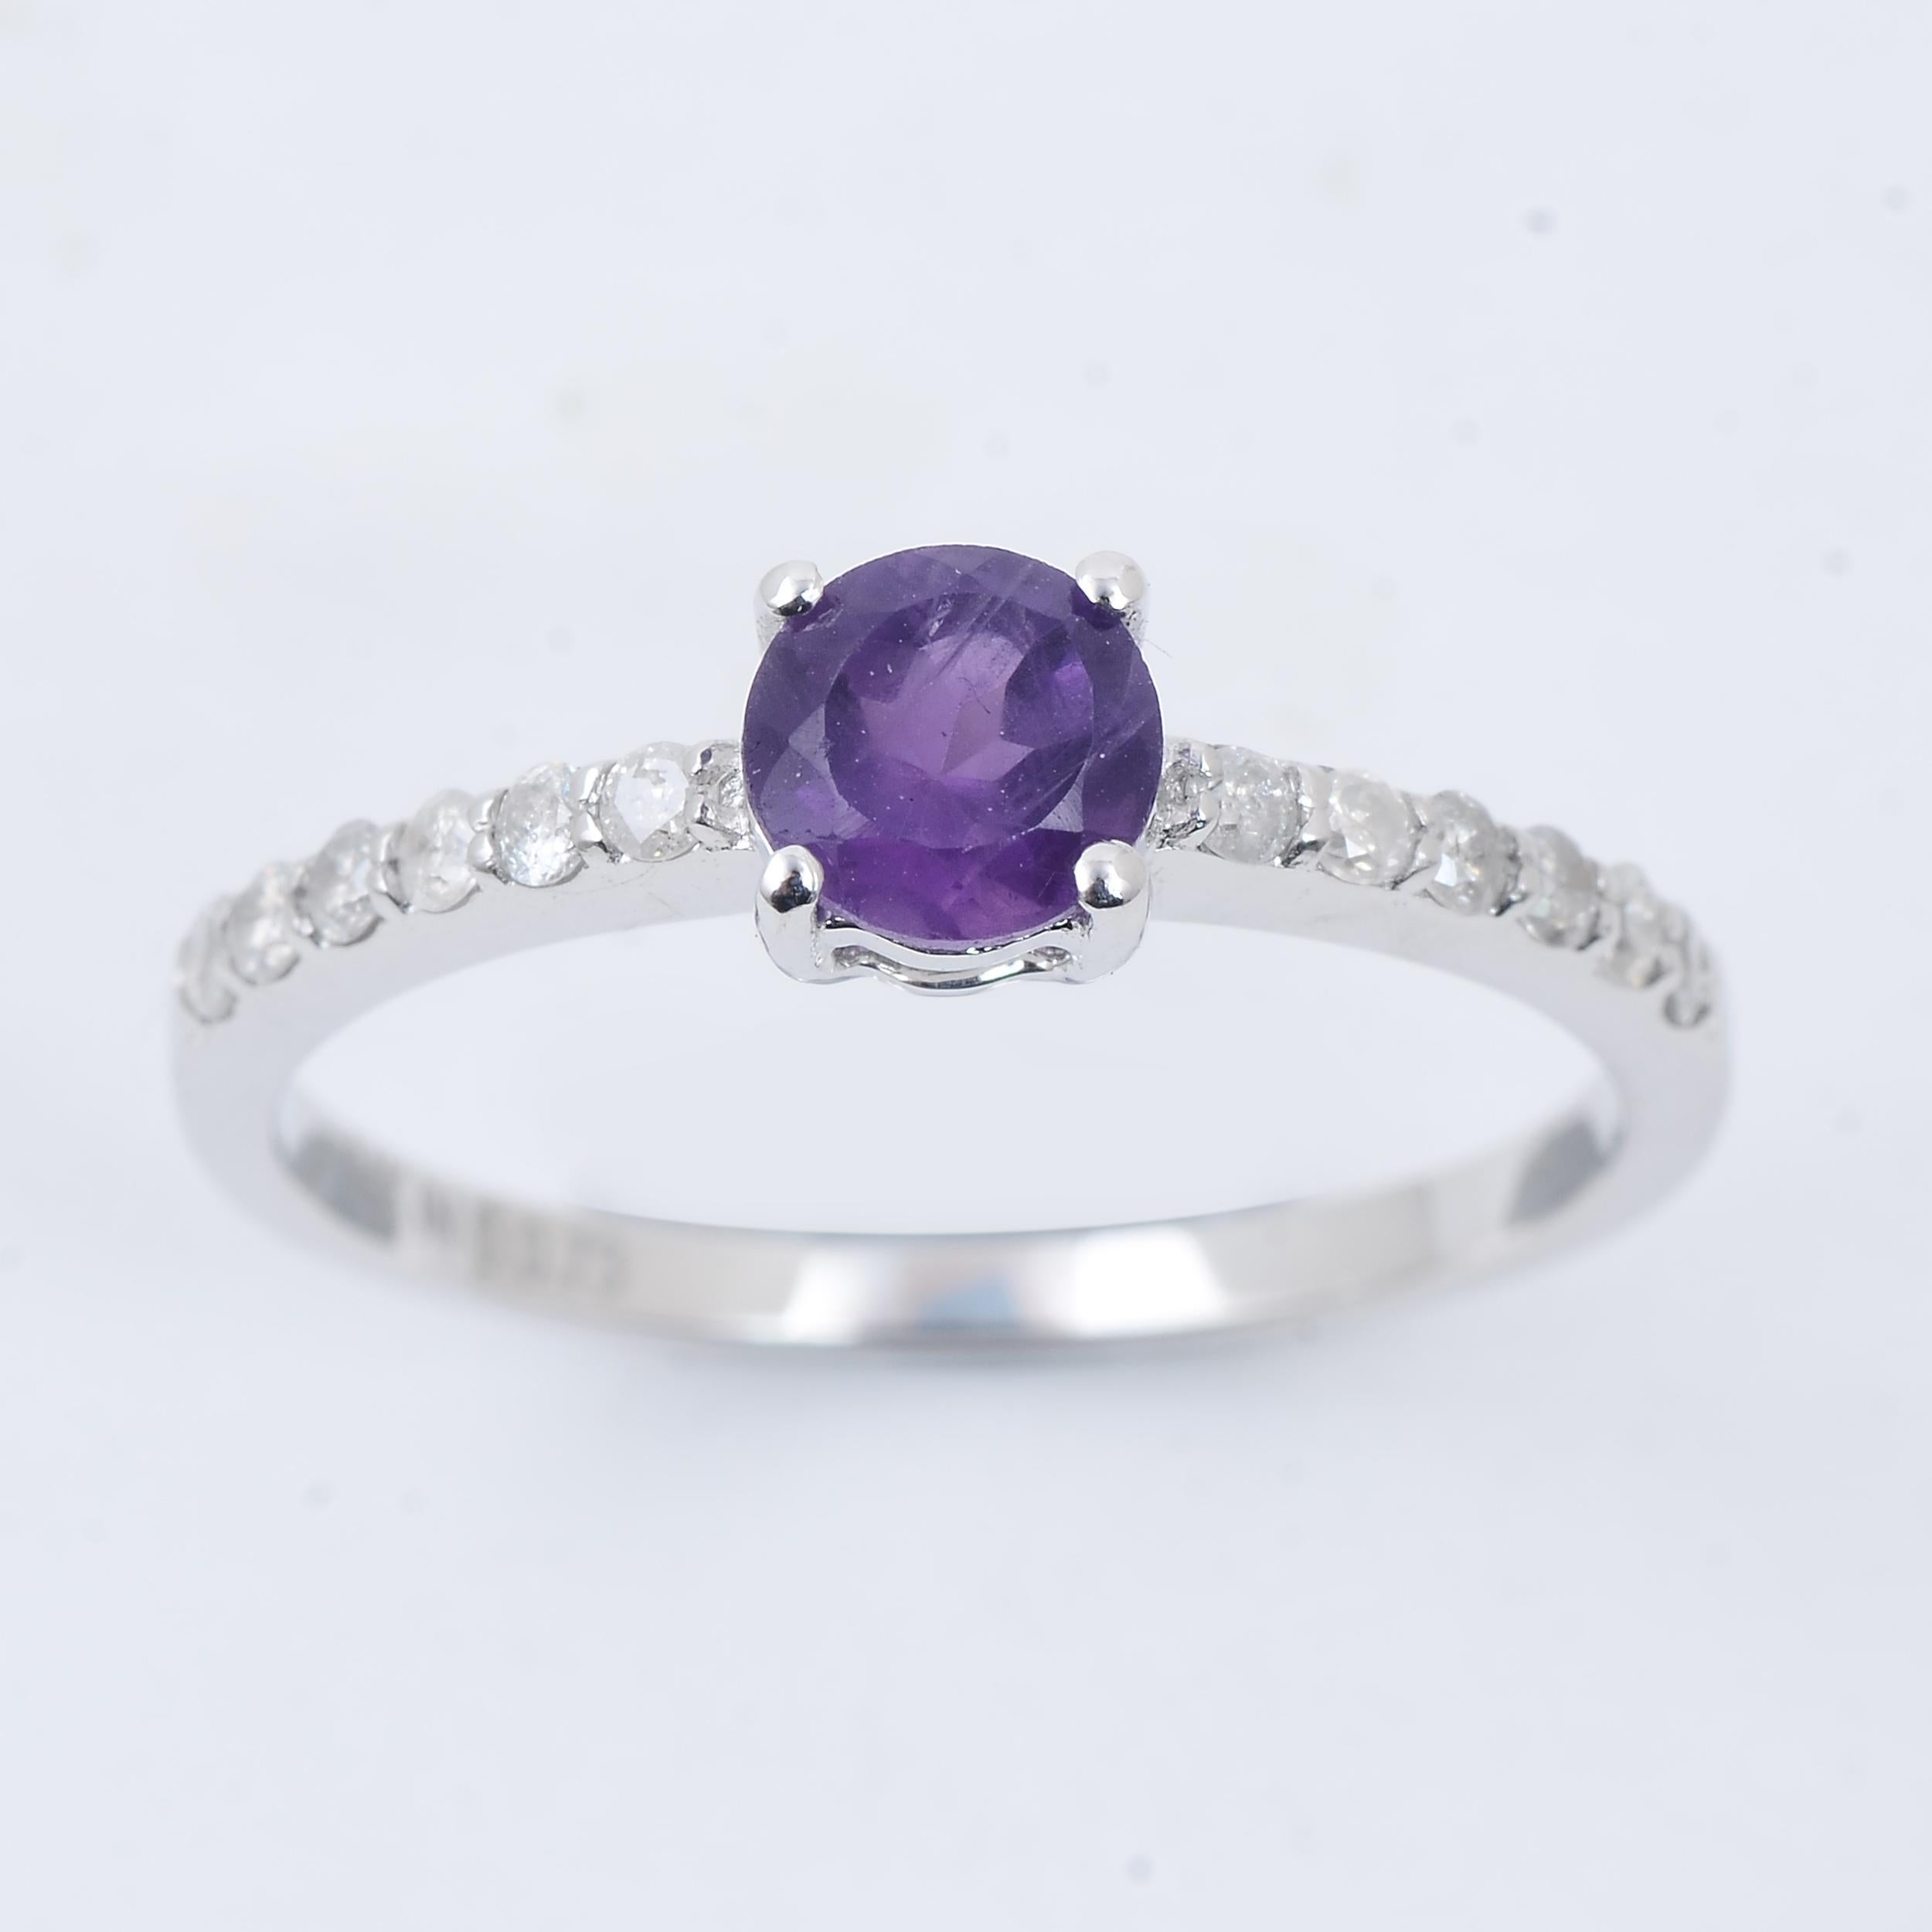 Luxurious 14K Amethyst & Diamond Cocktail Ring, Size 6.75 - Statement Jewelry For Sale 1